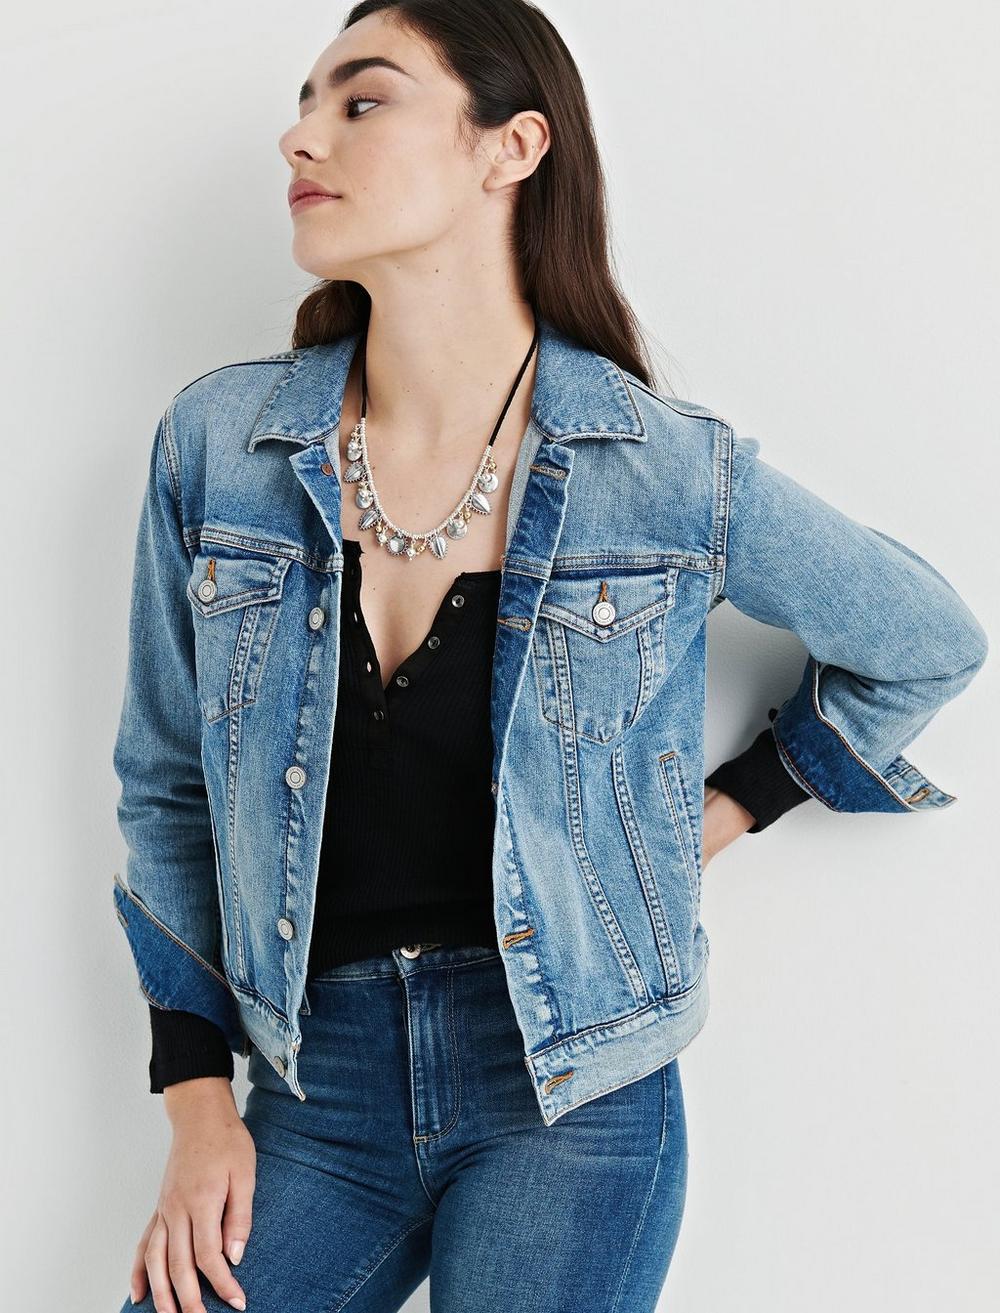 LEATHER DISK COLLAR NECKLACE | Lucky Brand